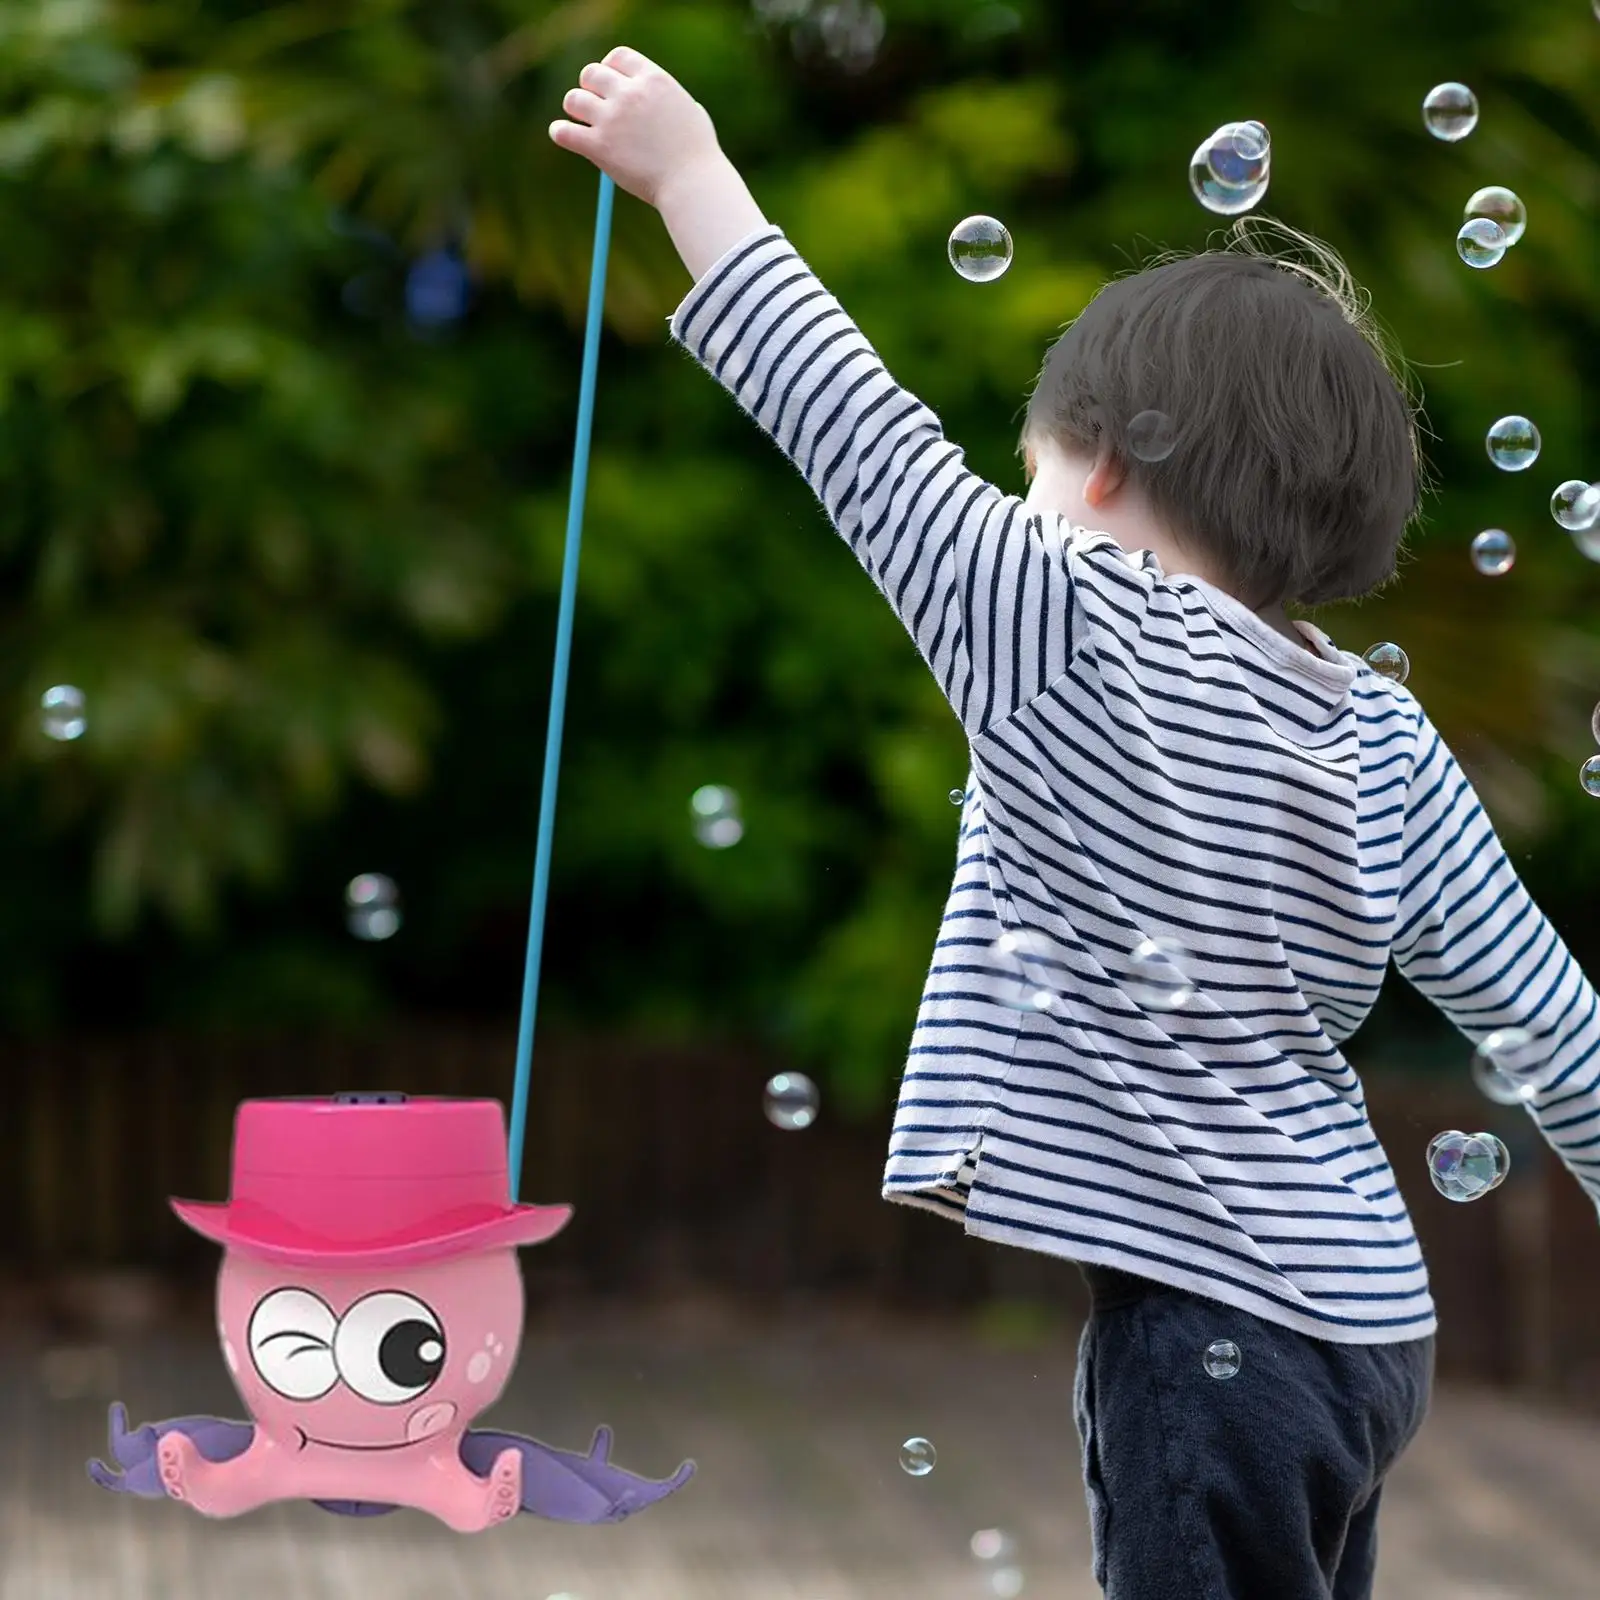 Automatic Bubble Blower Novelty Summer Toys Portable Walkable Shape for Preschool Outdoor Activities Parks Kids Boys Girls